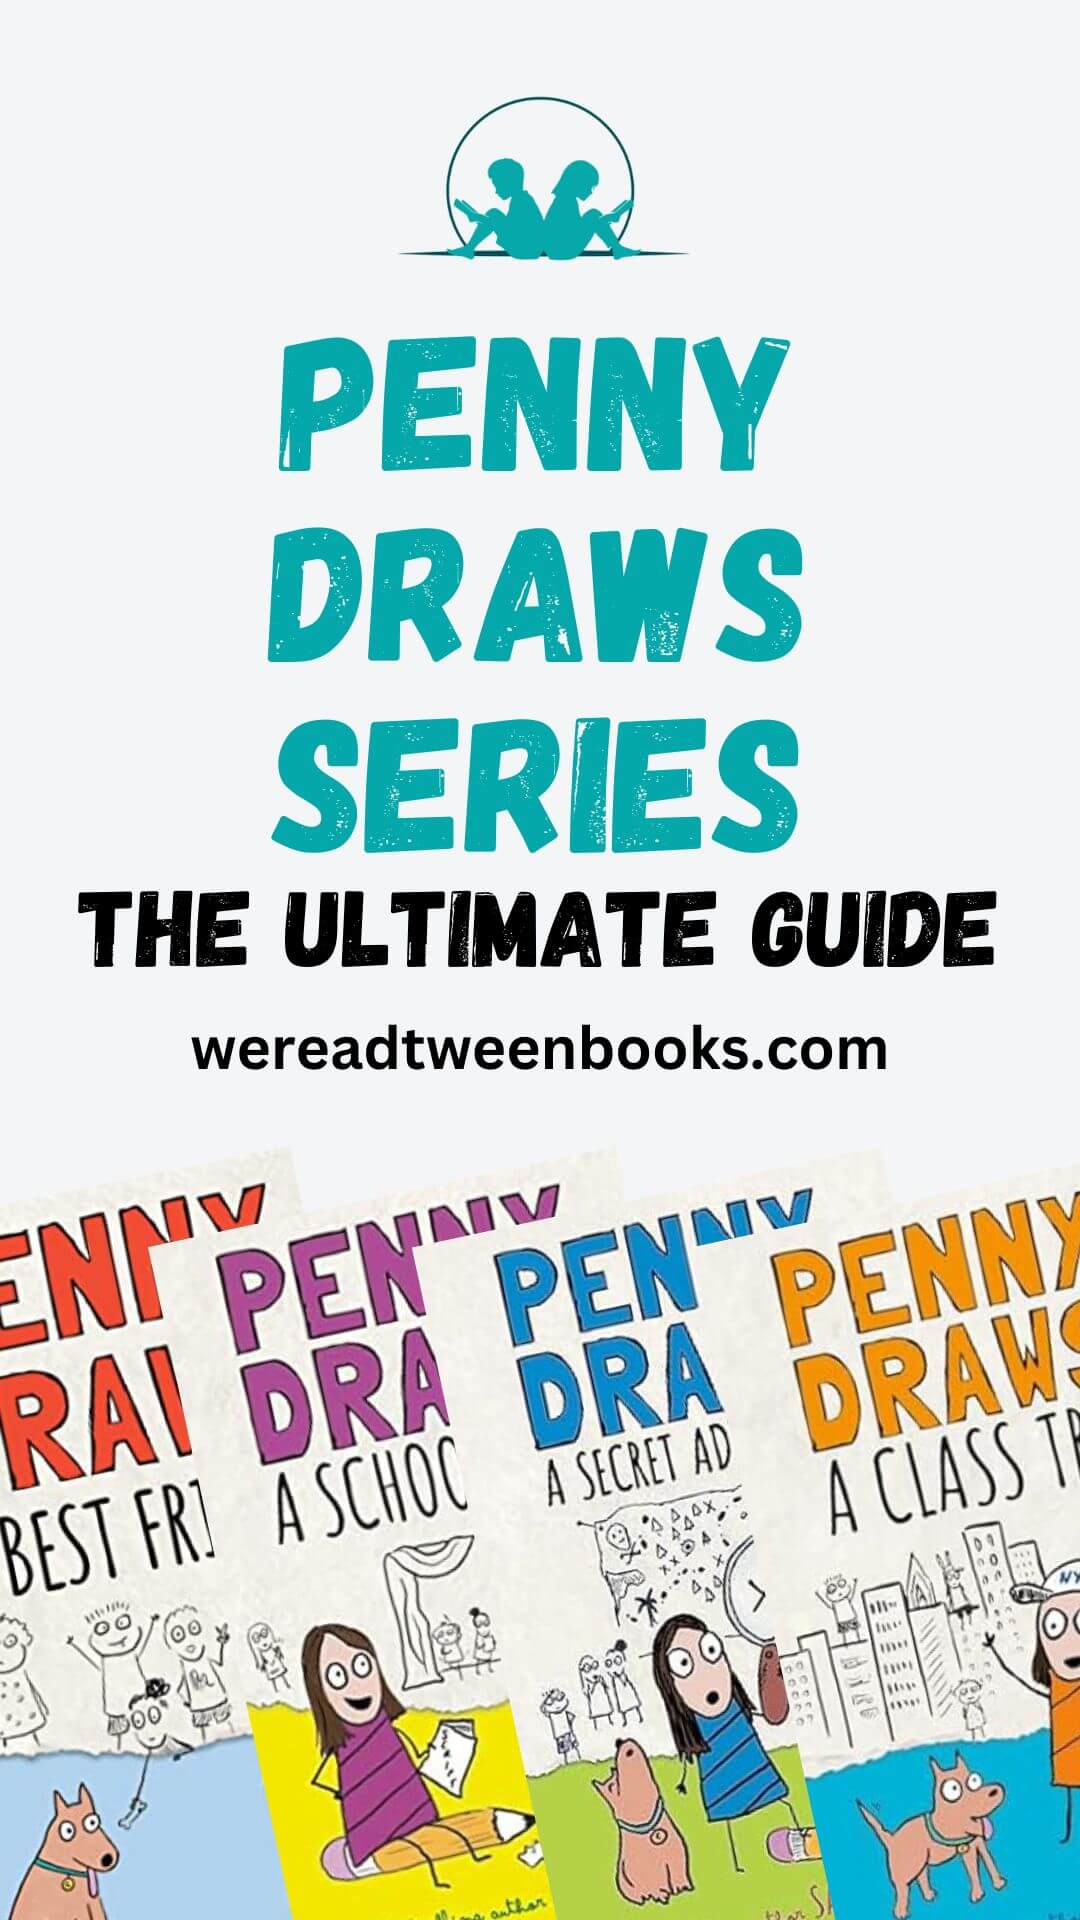 Check out the complete guide to Penny Draws series in order on We Read Tween Books if your tween reader loves graphic novels.